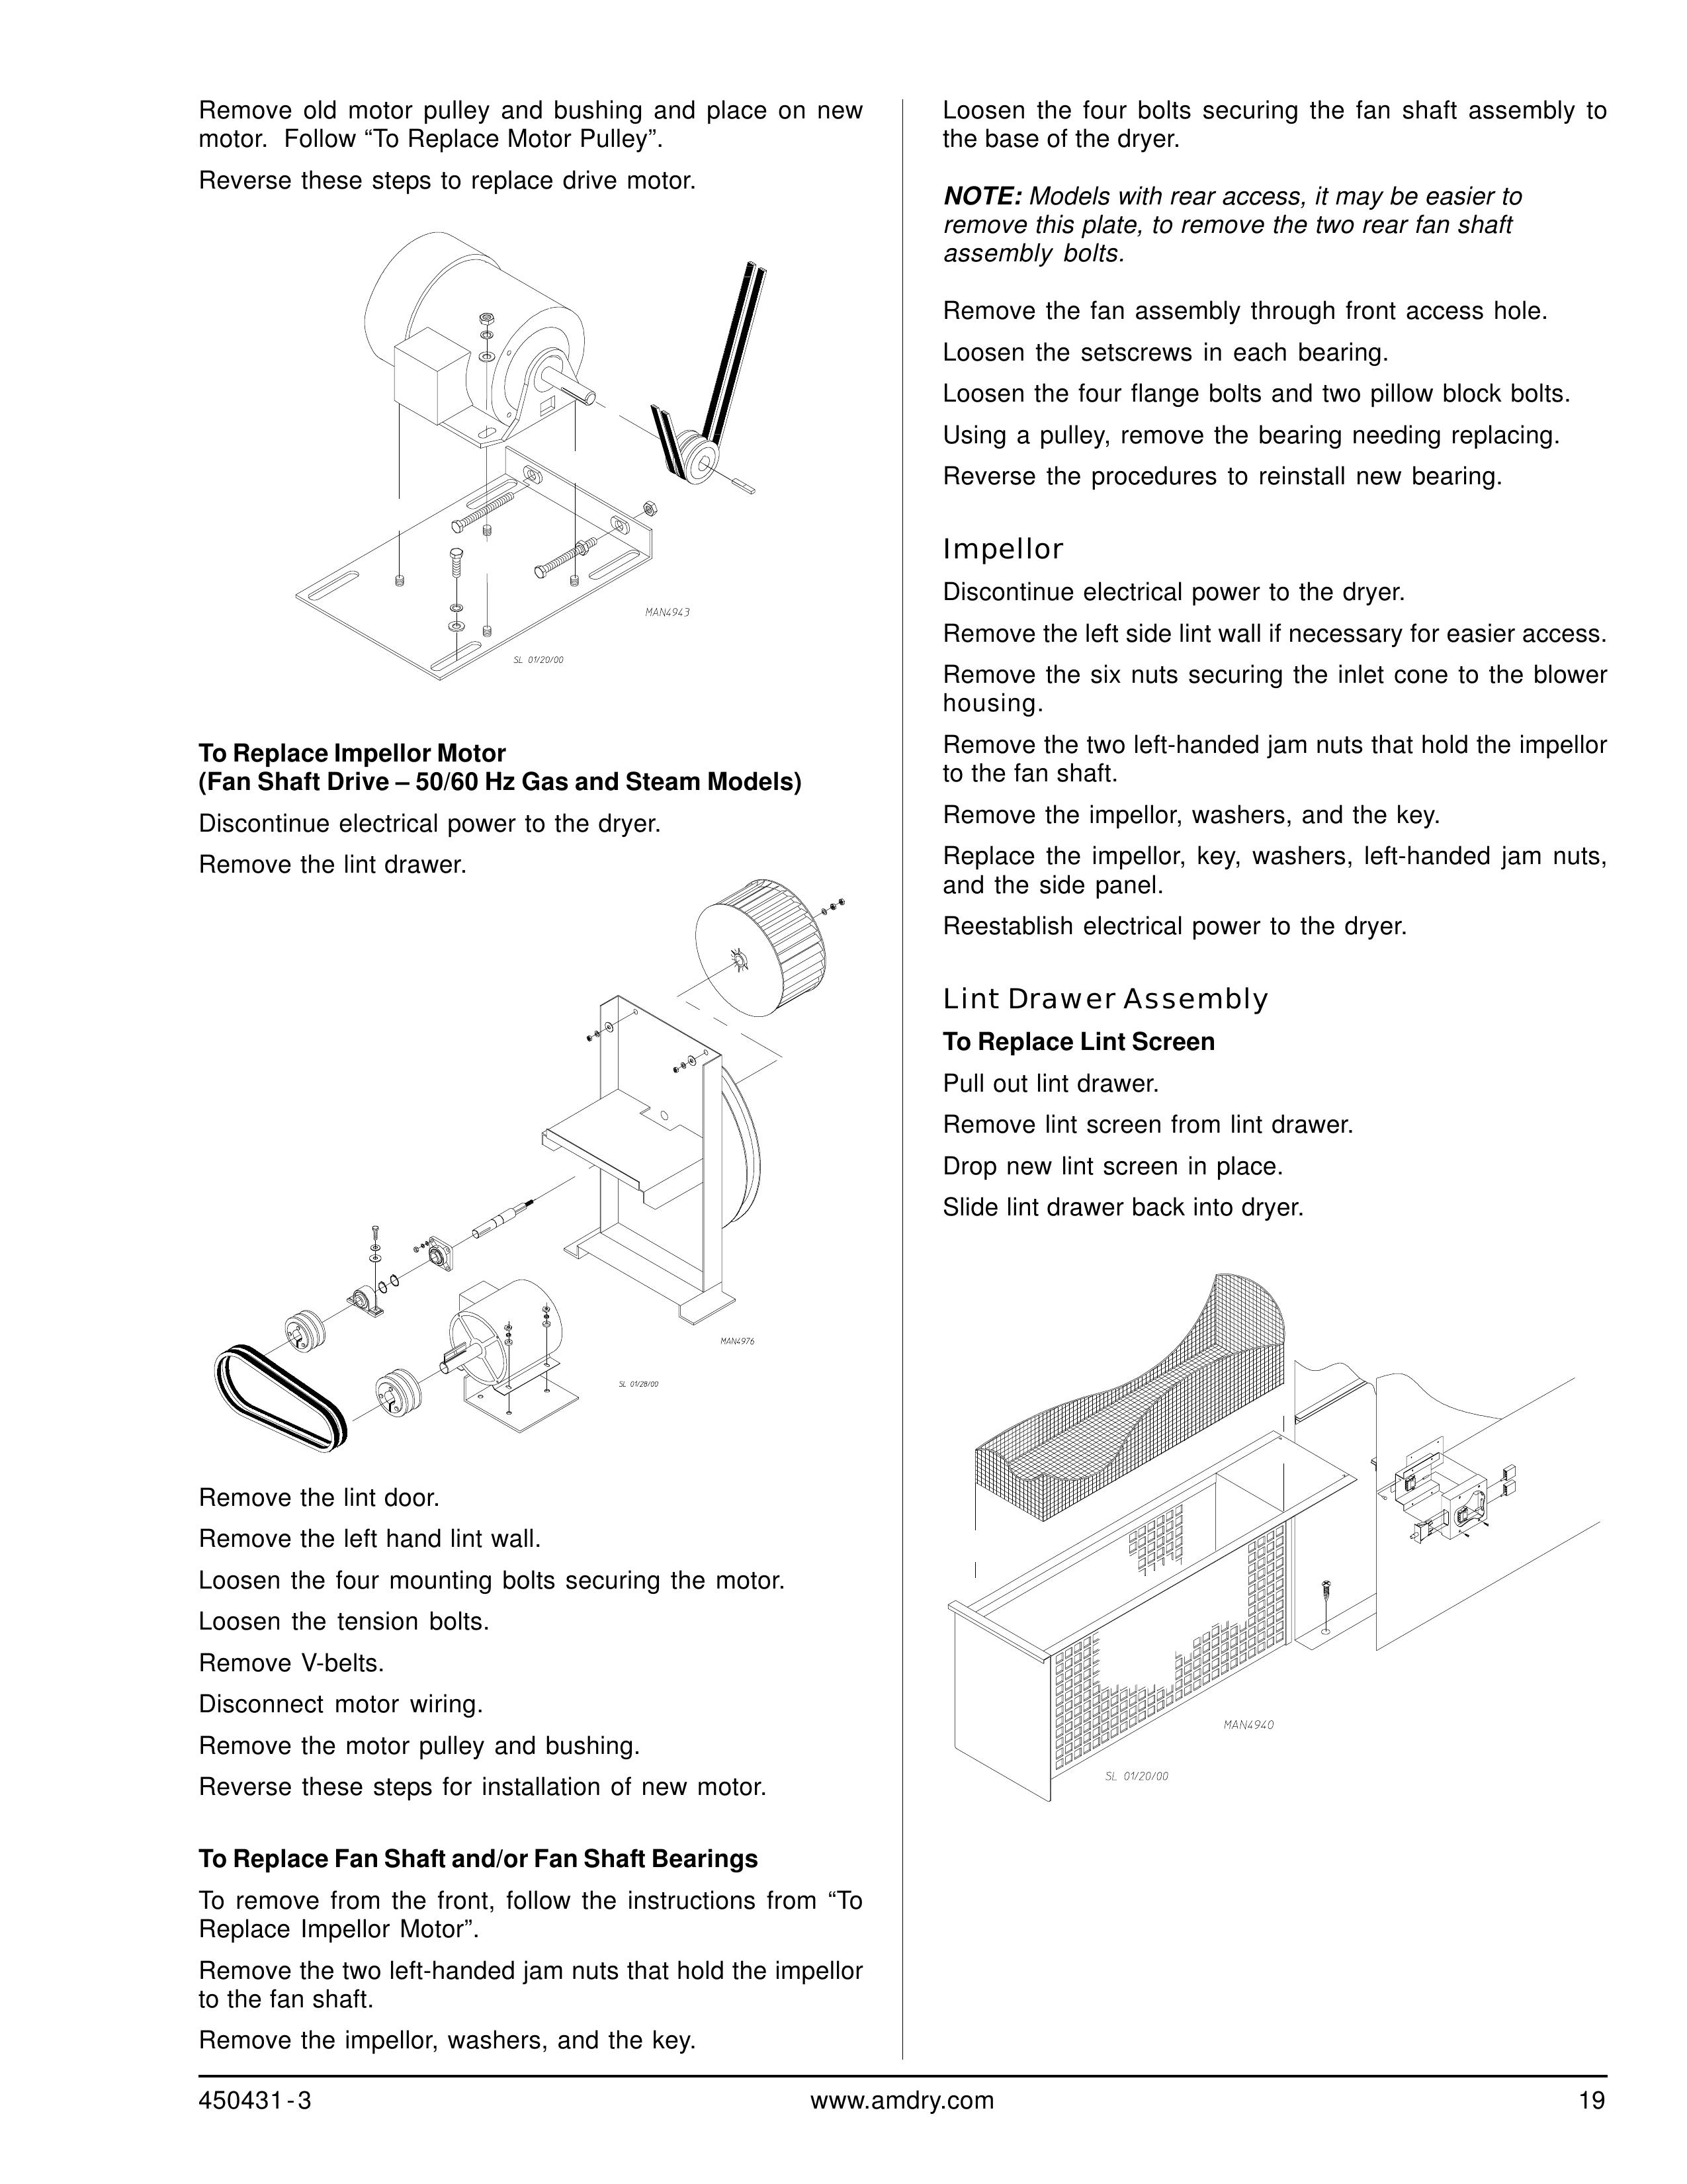 ADC ML-190 Clothes Dryer User Manual (Page 19)